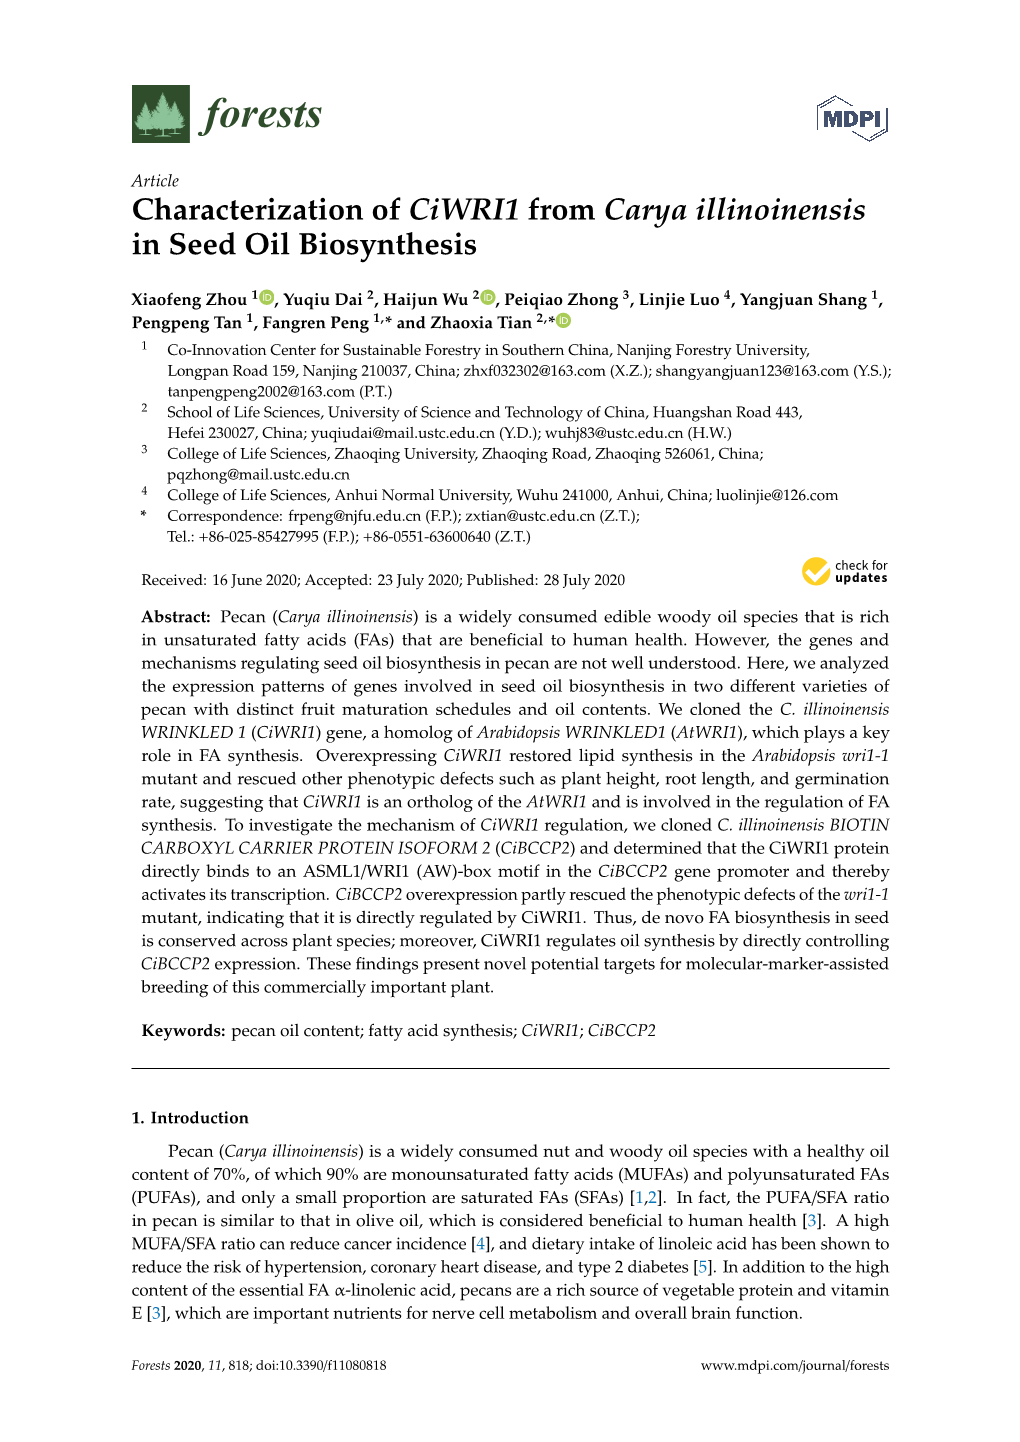 Characterization of Ciwri1 from Carya Illinoinensis in Seed Oil Biosynthesis